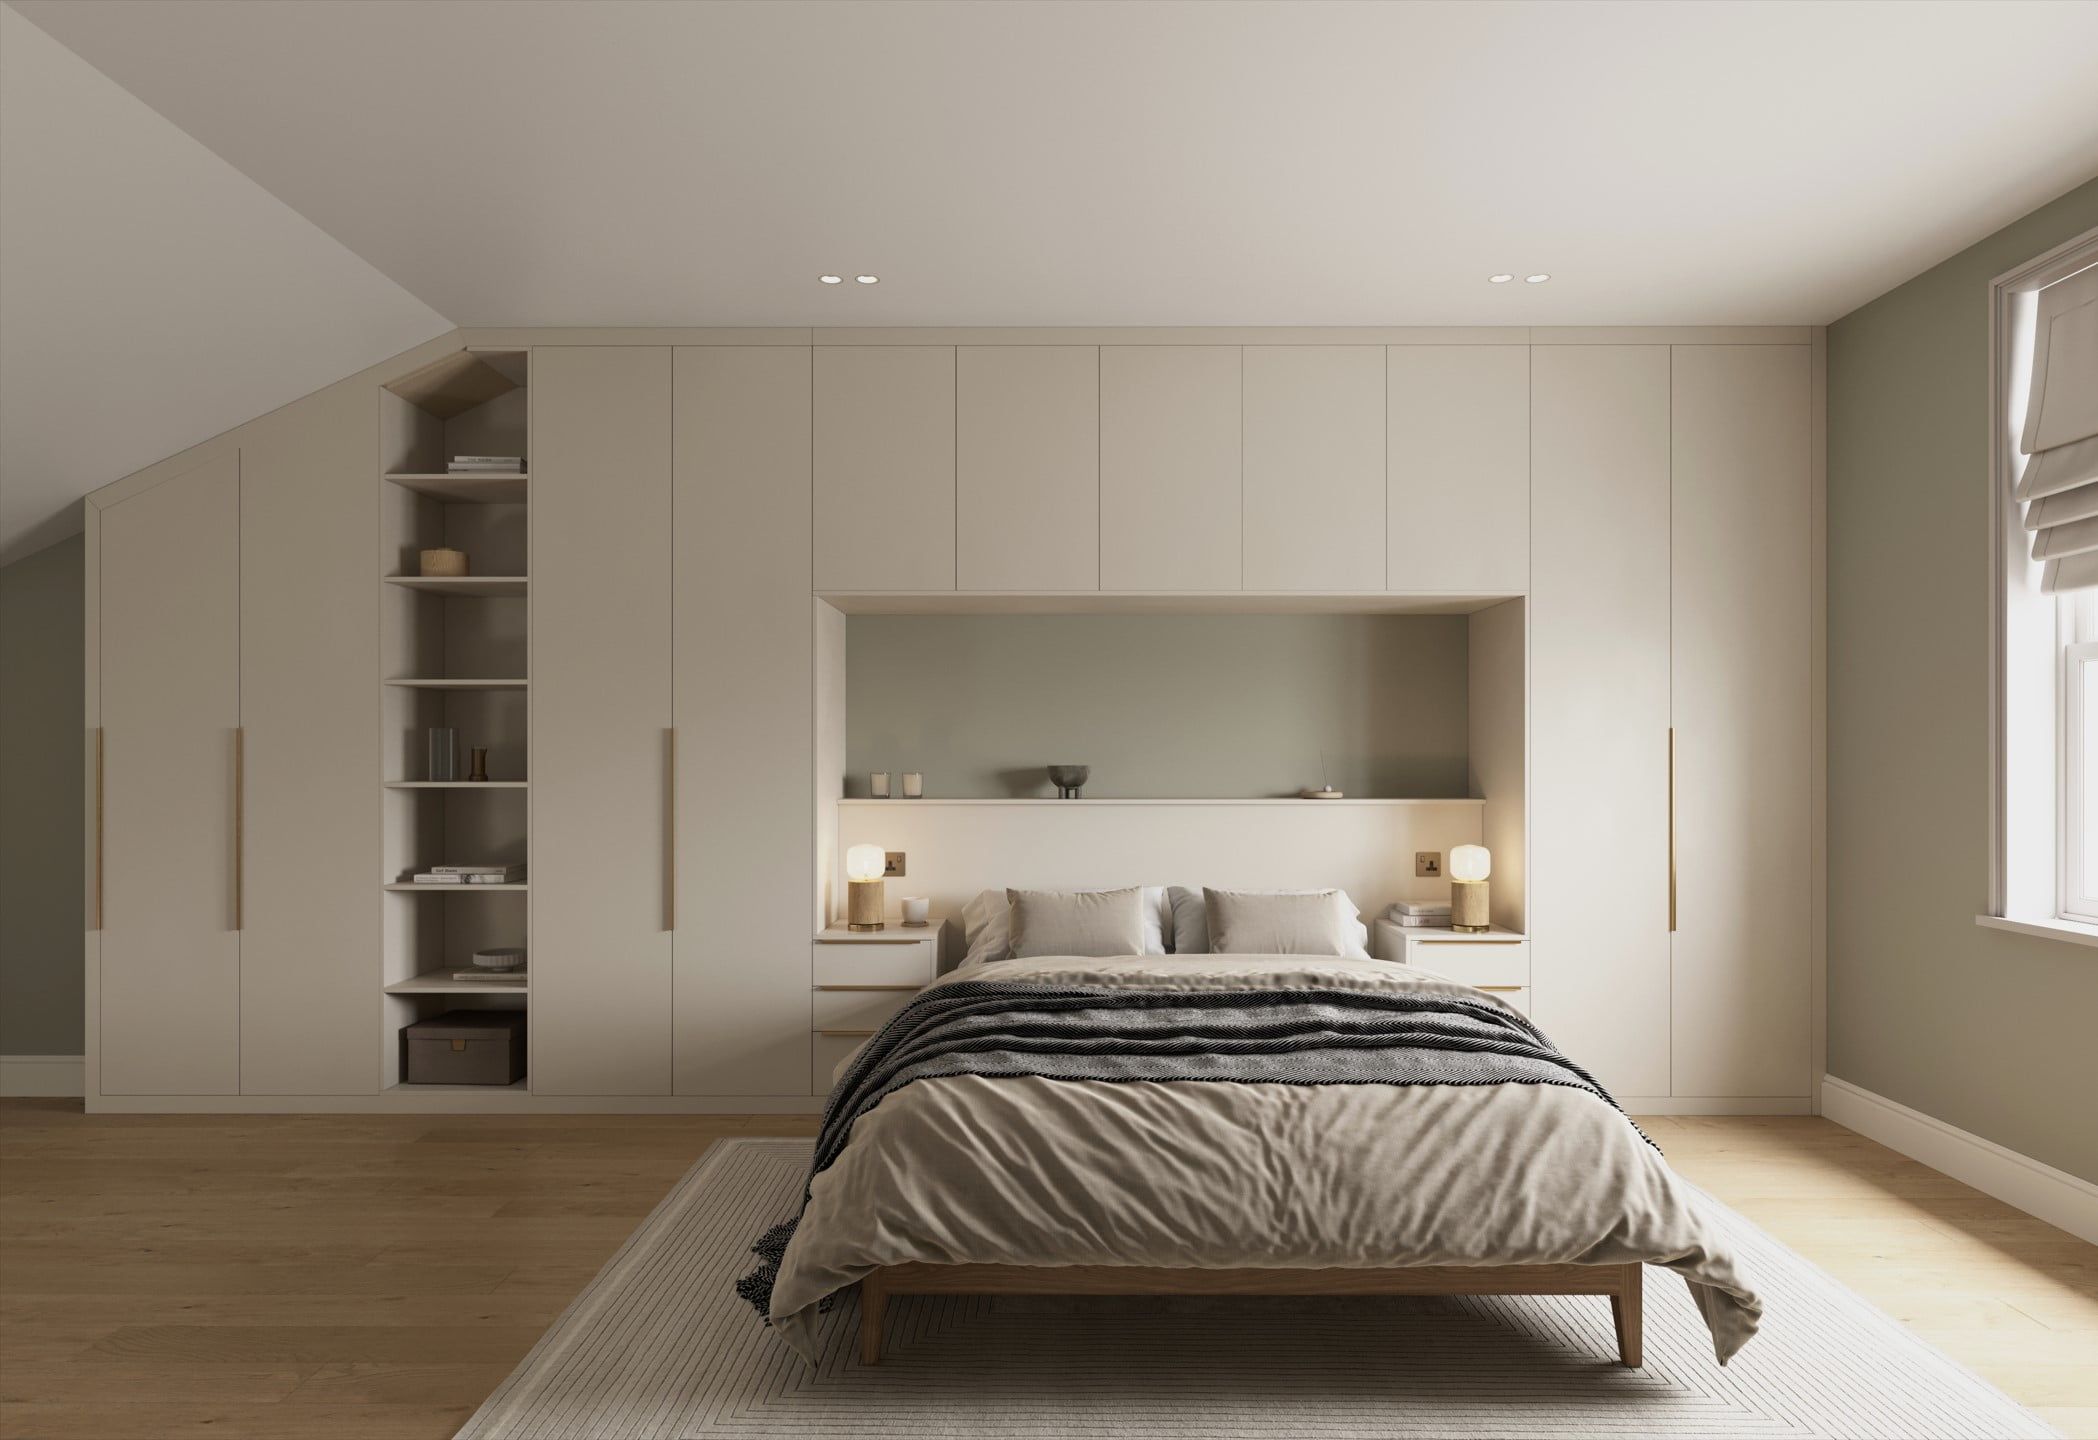 Overbed Fitted Wardrobes And Storage Units, Bespoke Overhead Storage Intended For Bedroom Wardrobes Storages (View 10 of 15)